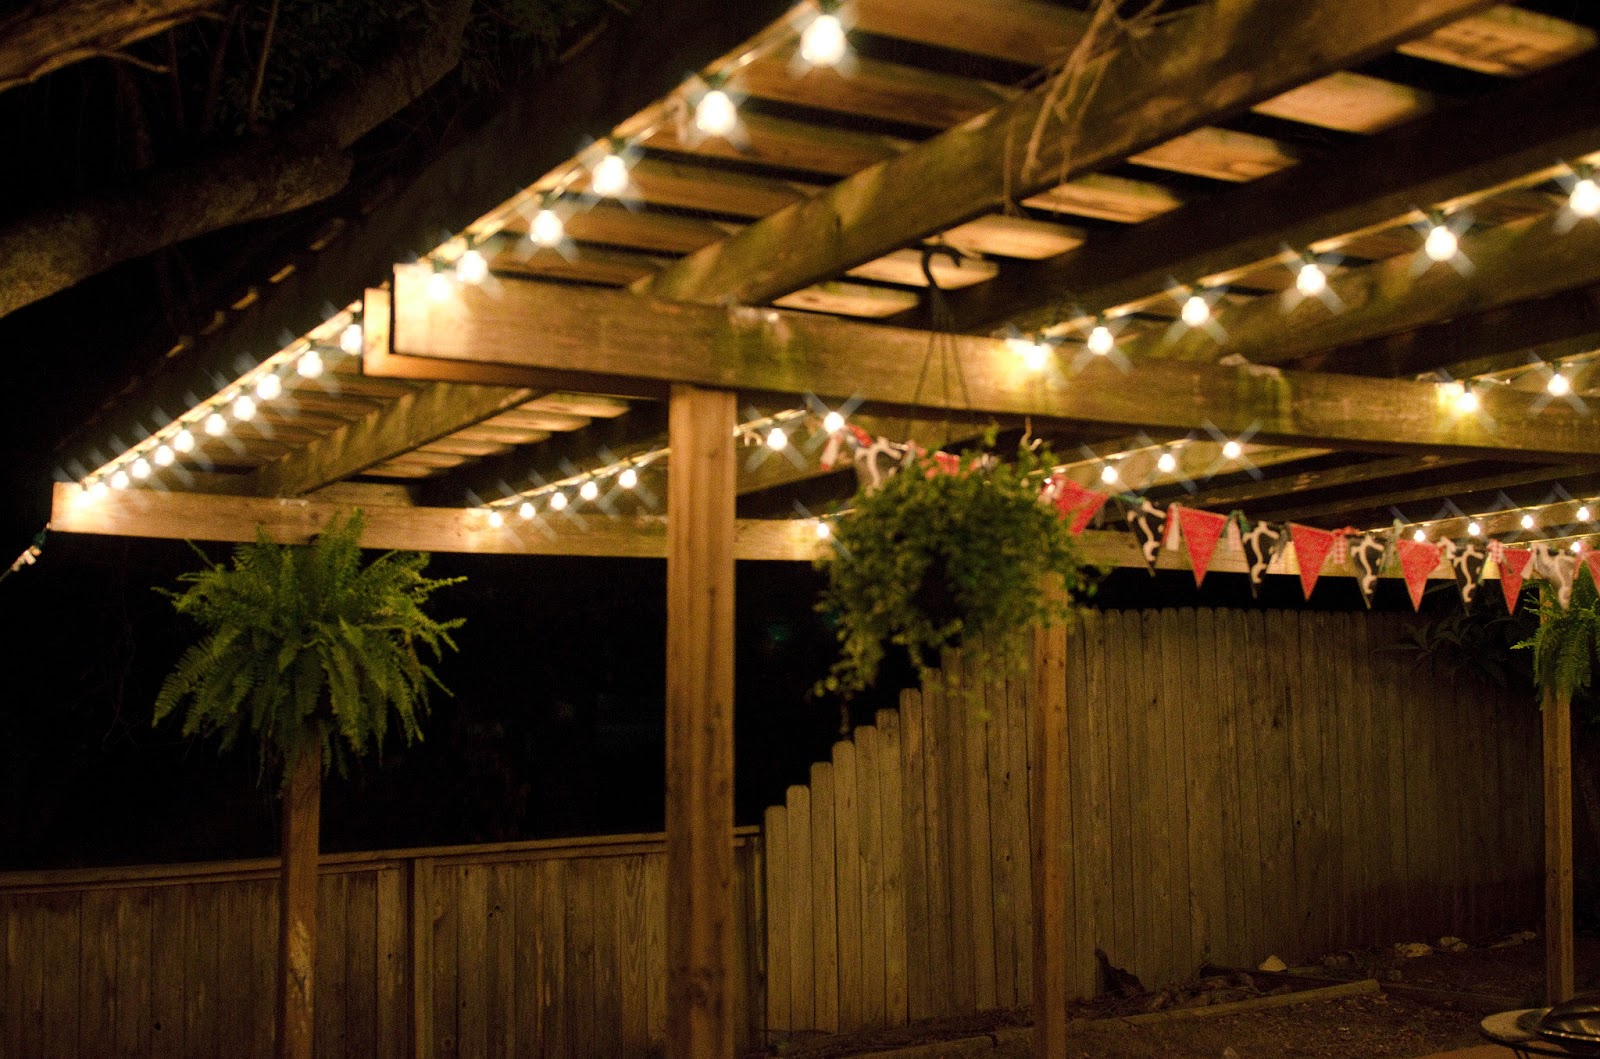 The Patio lights that can turn everything towards it